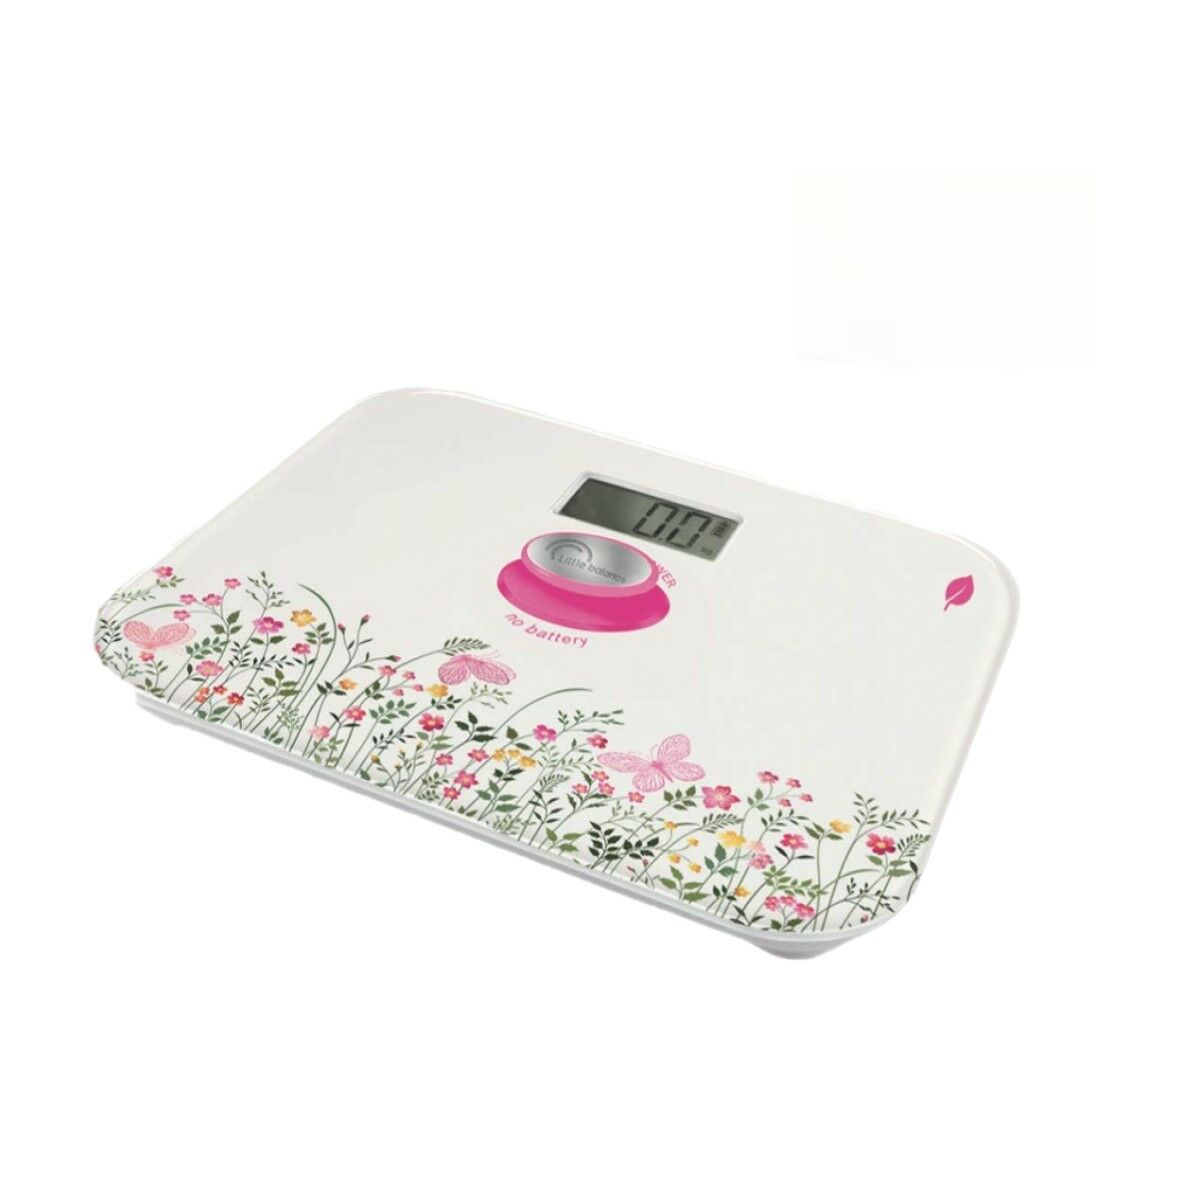 Digital Bathroom Scales Little Balance Kinetic Classic Floral Tempered Glass 180 kg